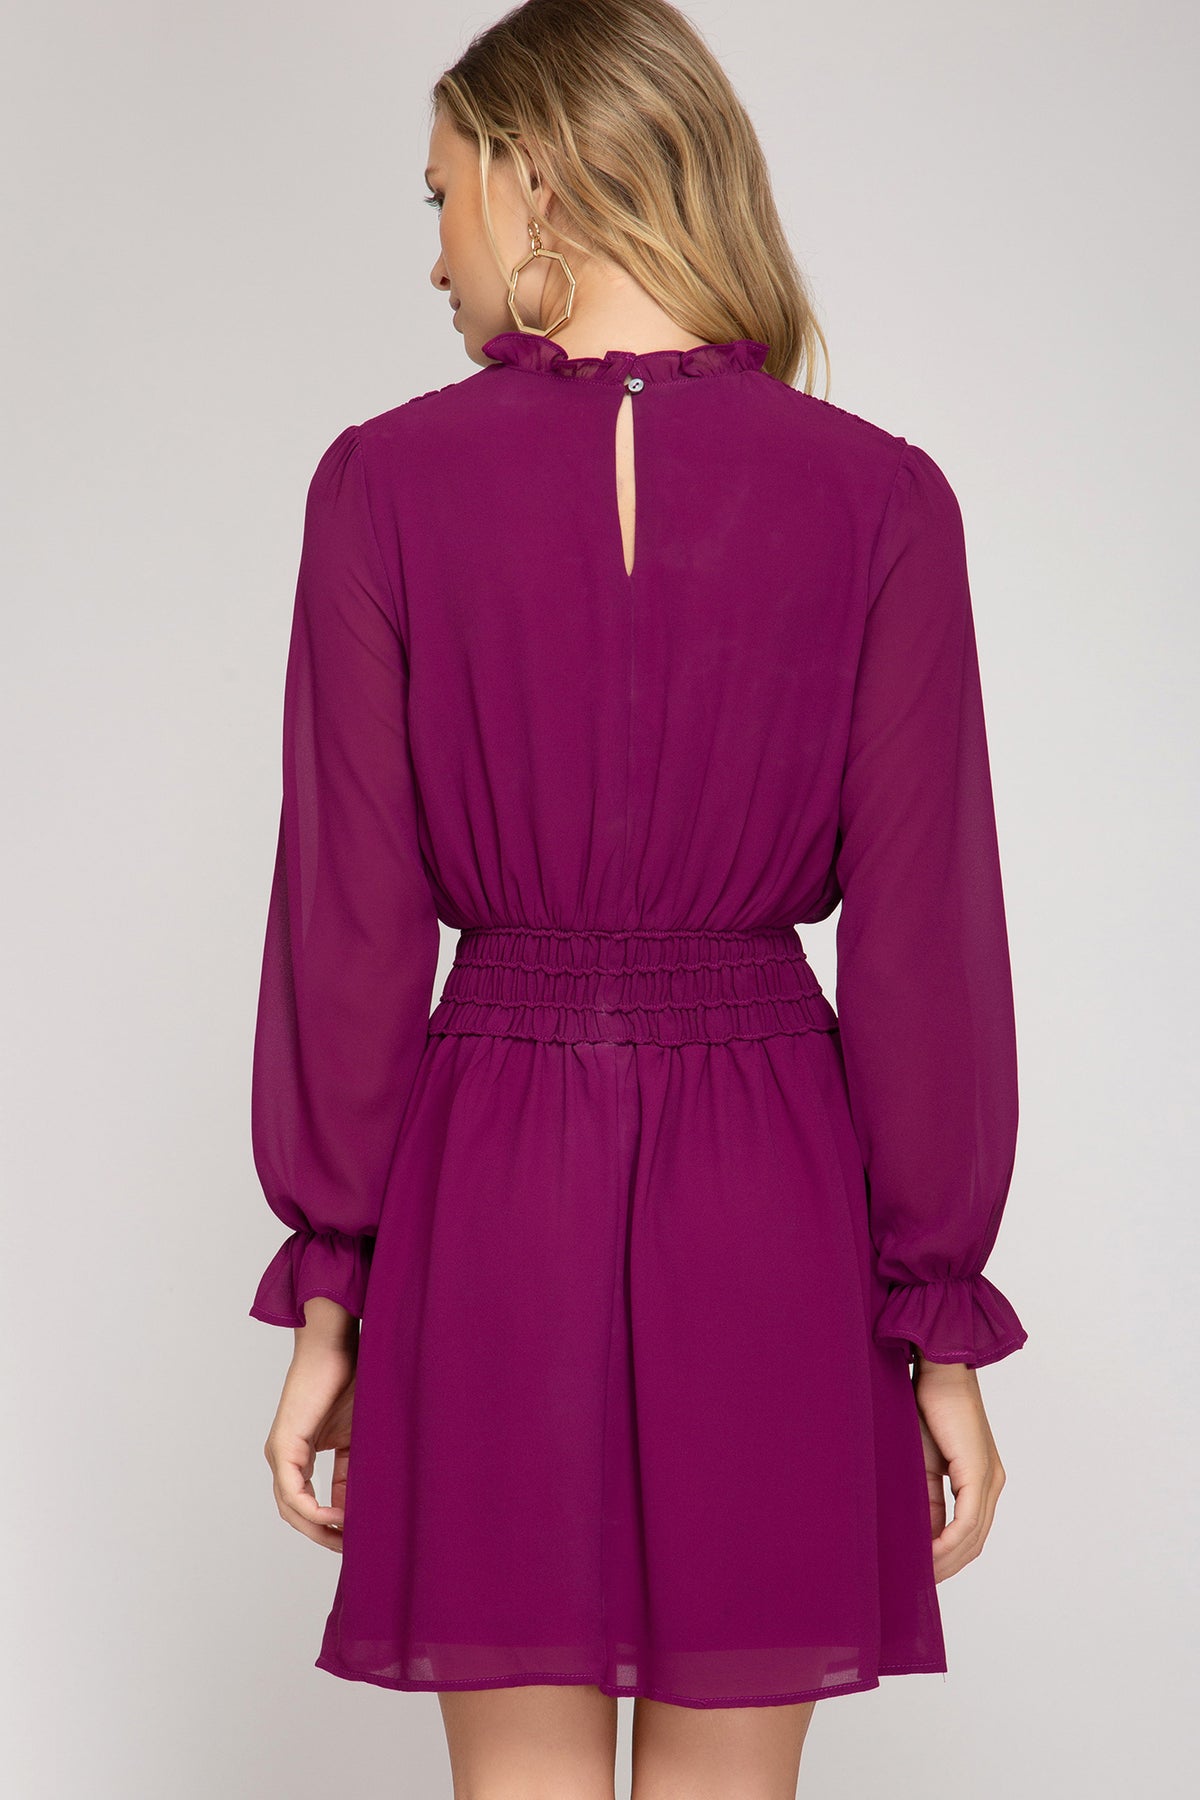 All About You Dress In Magenta